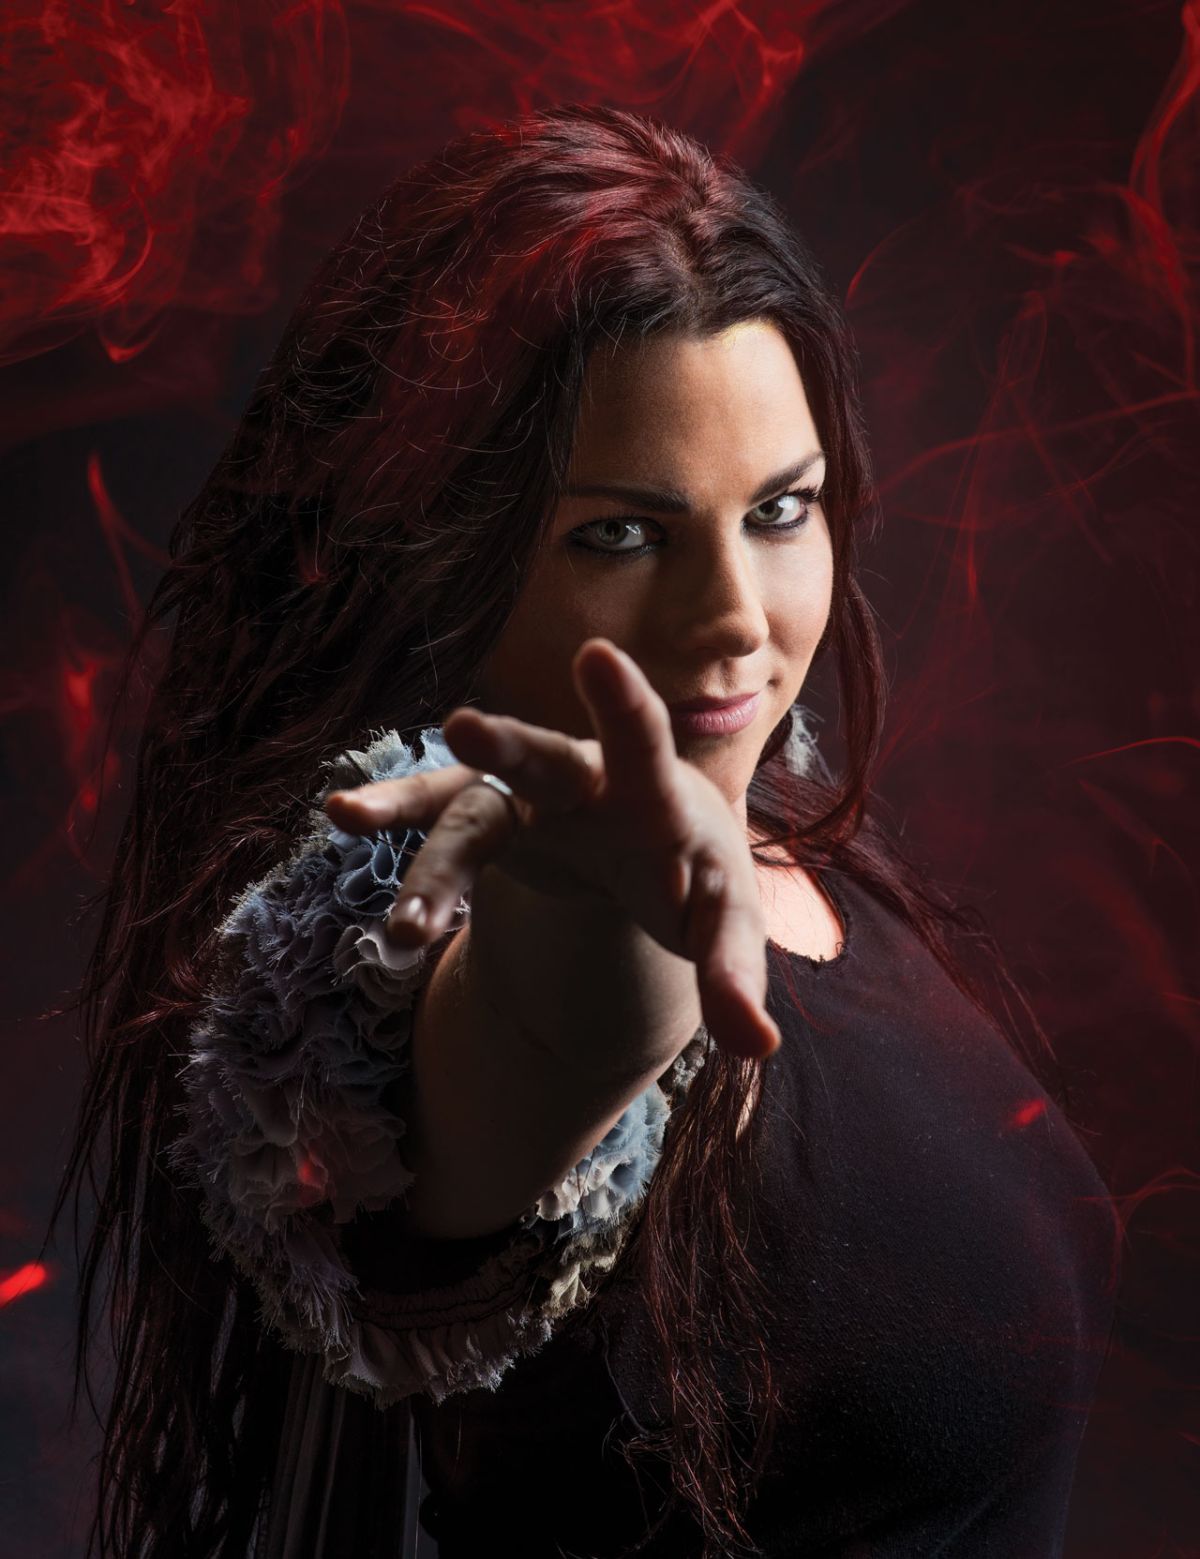 1200x1559
Keywords: worlds collide tour;amy lee;sharon den adel;photoshoot;sesion;red